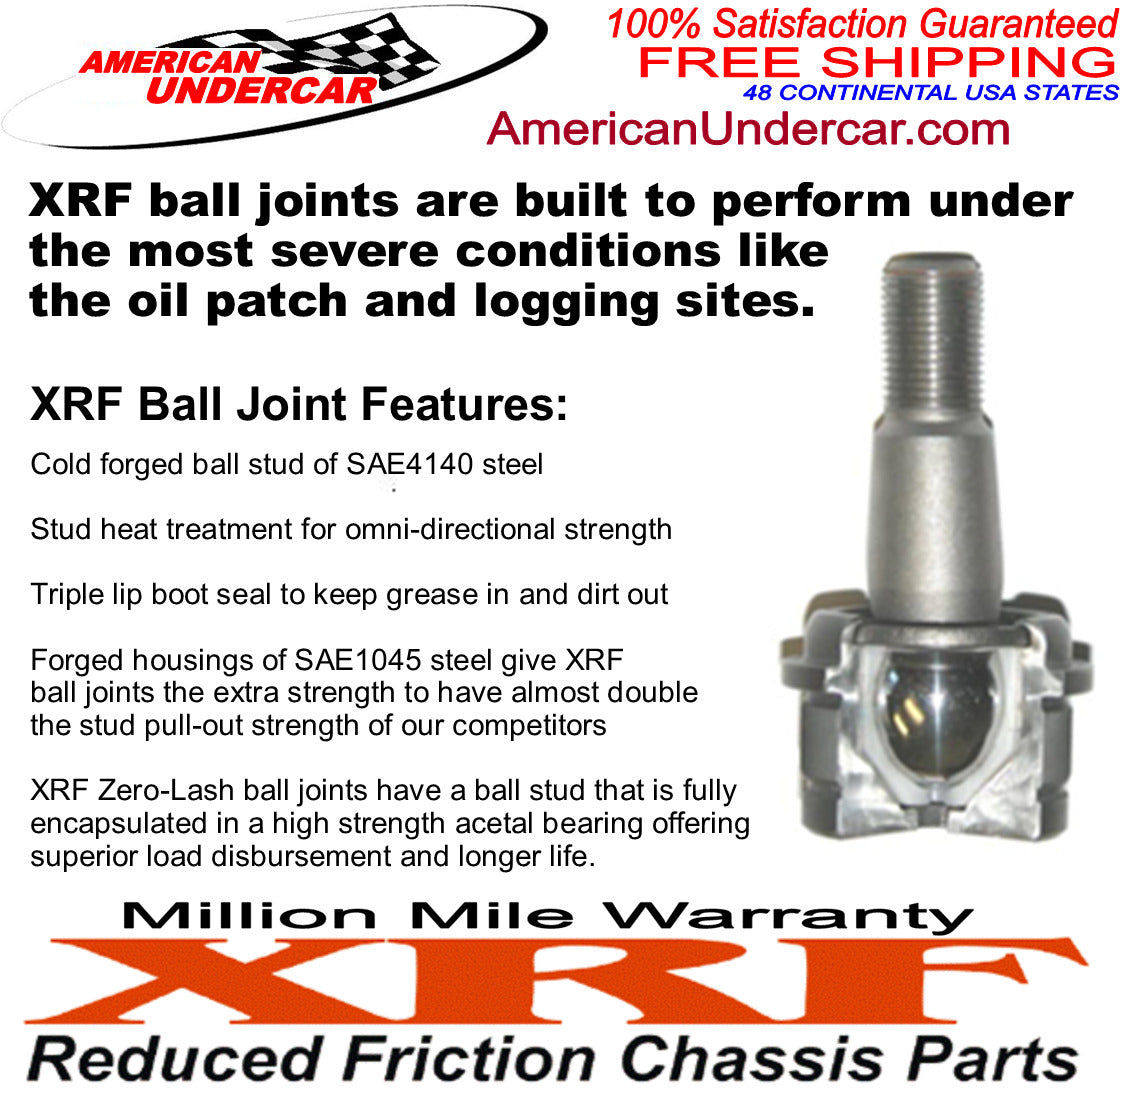 XRF Ford F350 Super Duty Ball Joint Steering and Suspension Kit 2005 - 2010 4x4